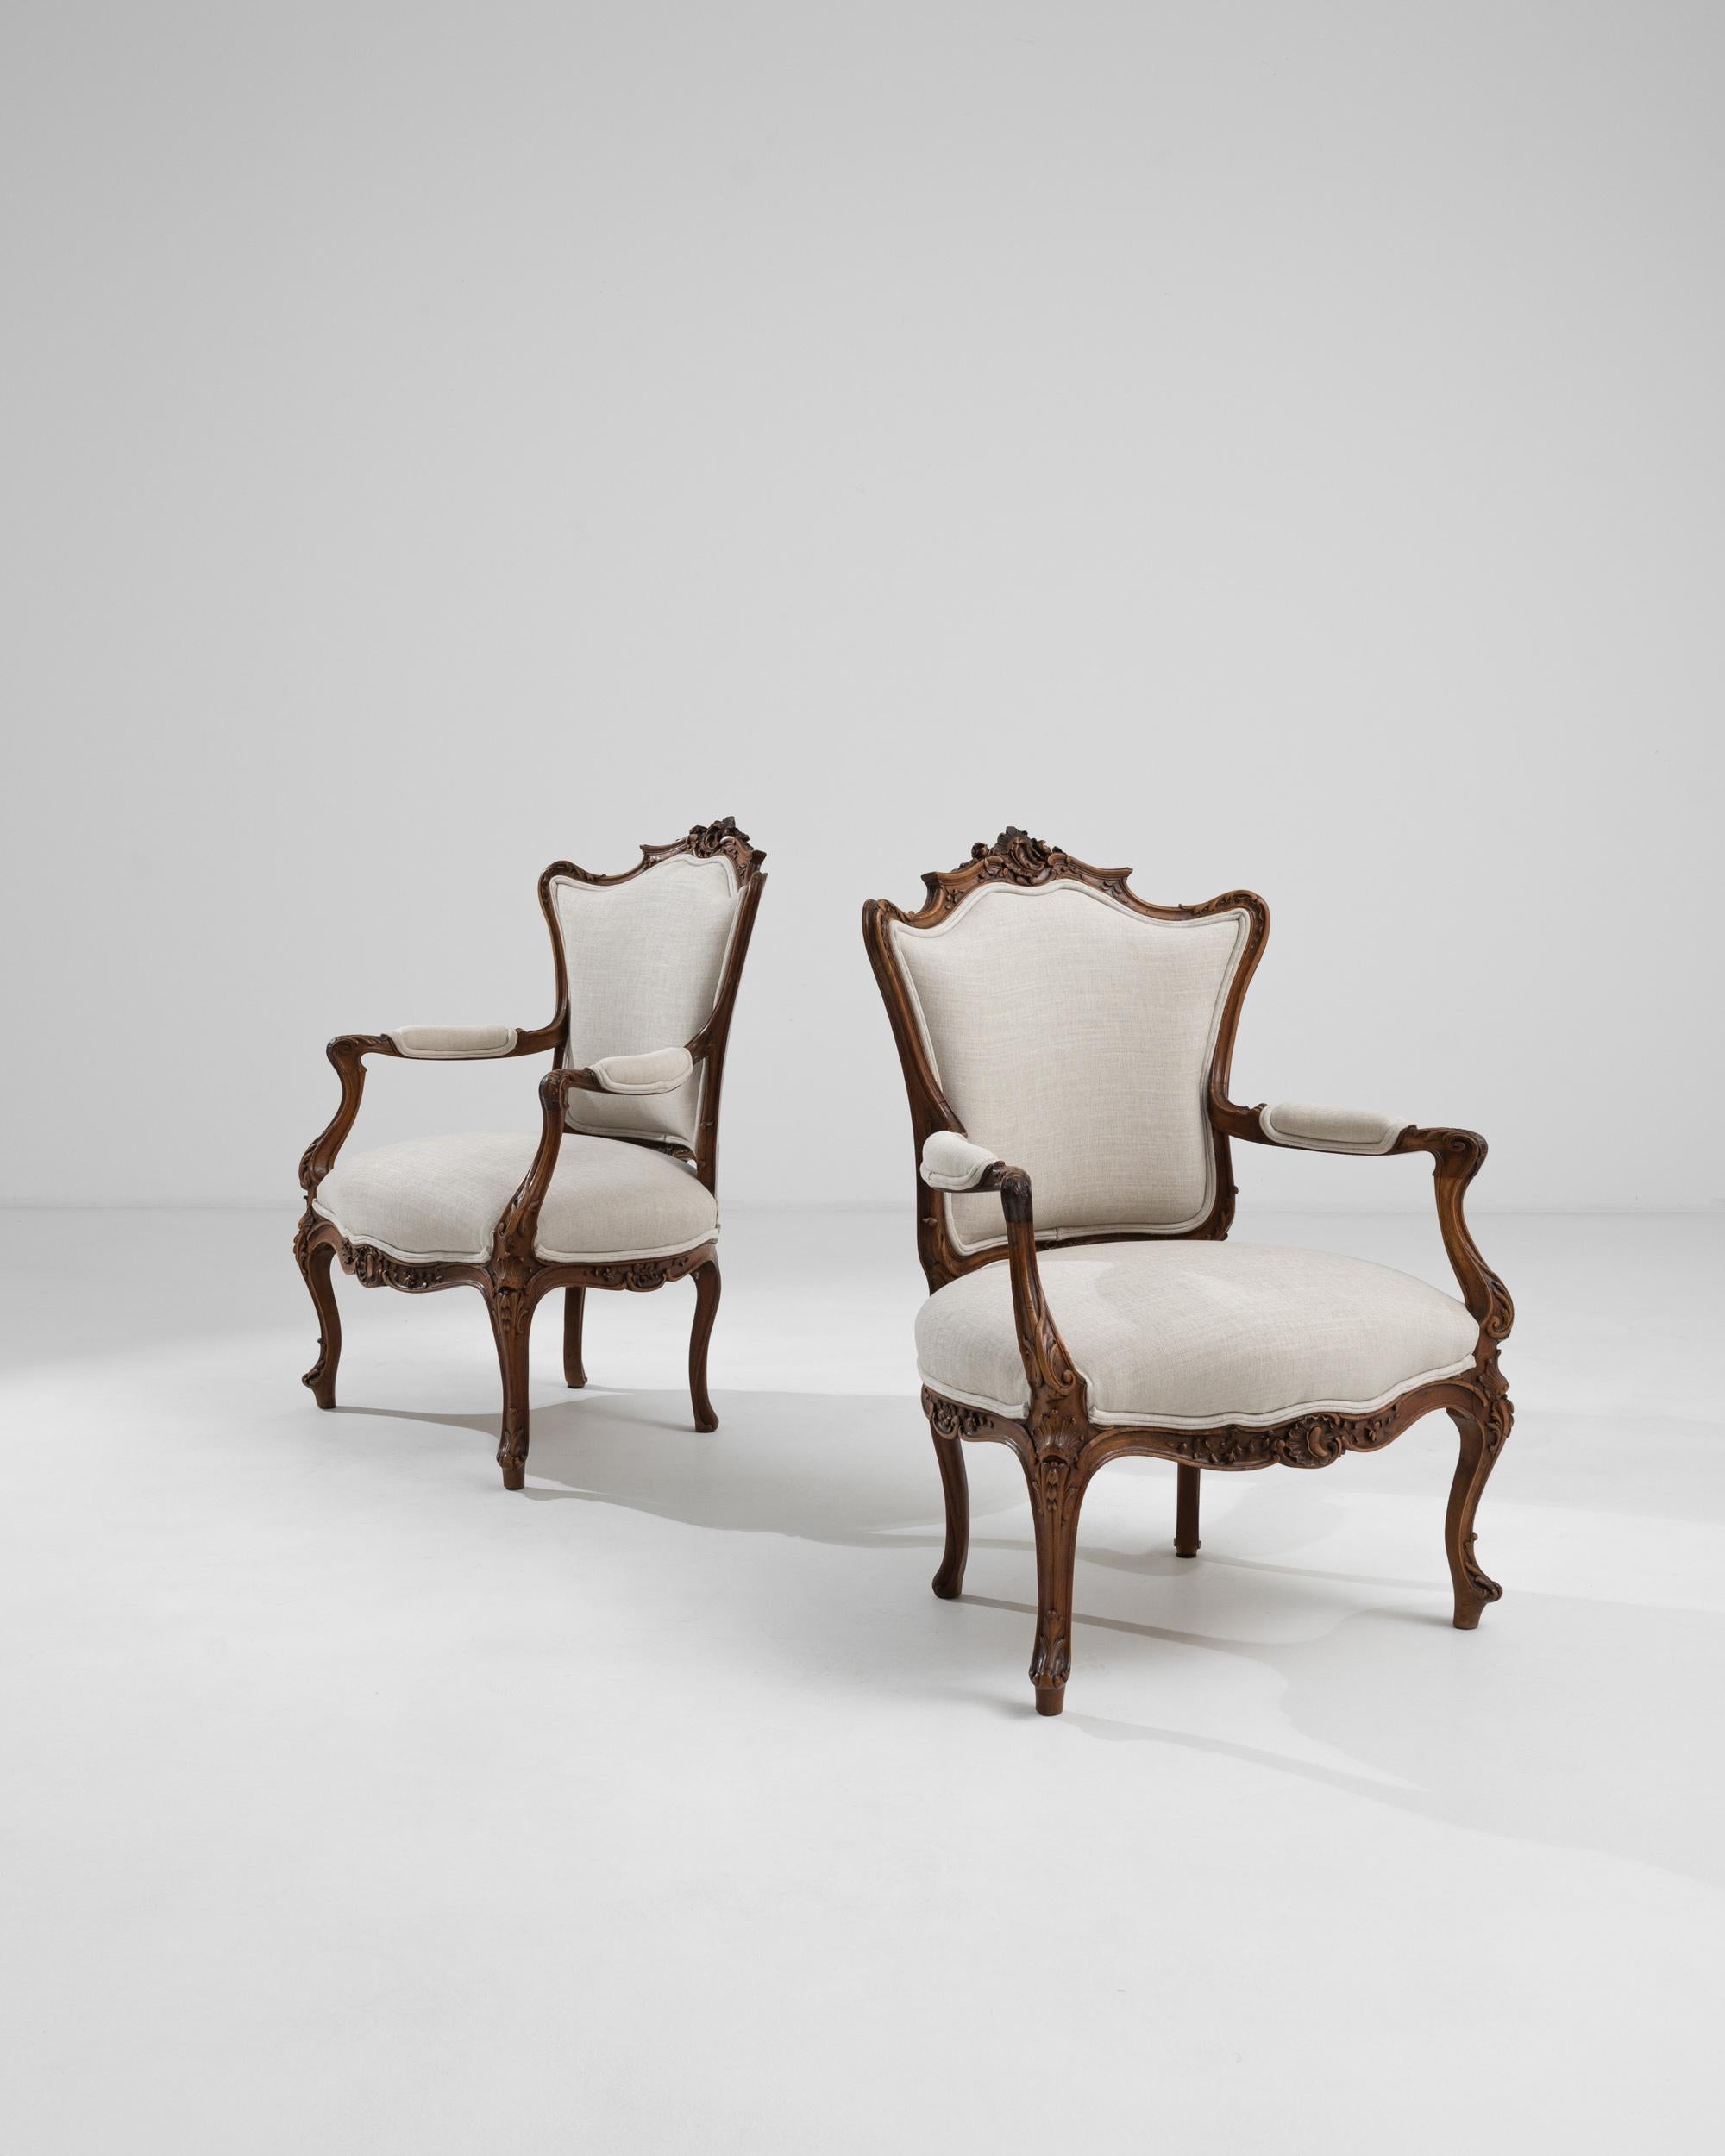 French Provincial 19th Century French Mahogany Armchairs, a Pair